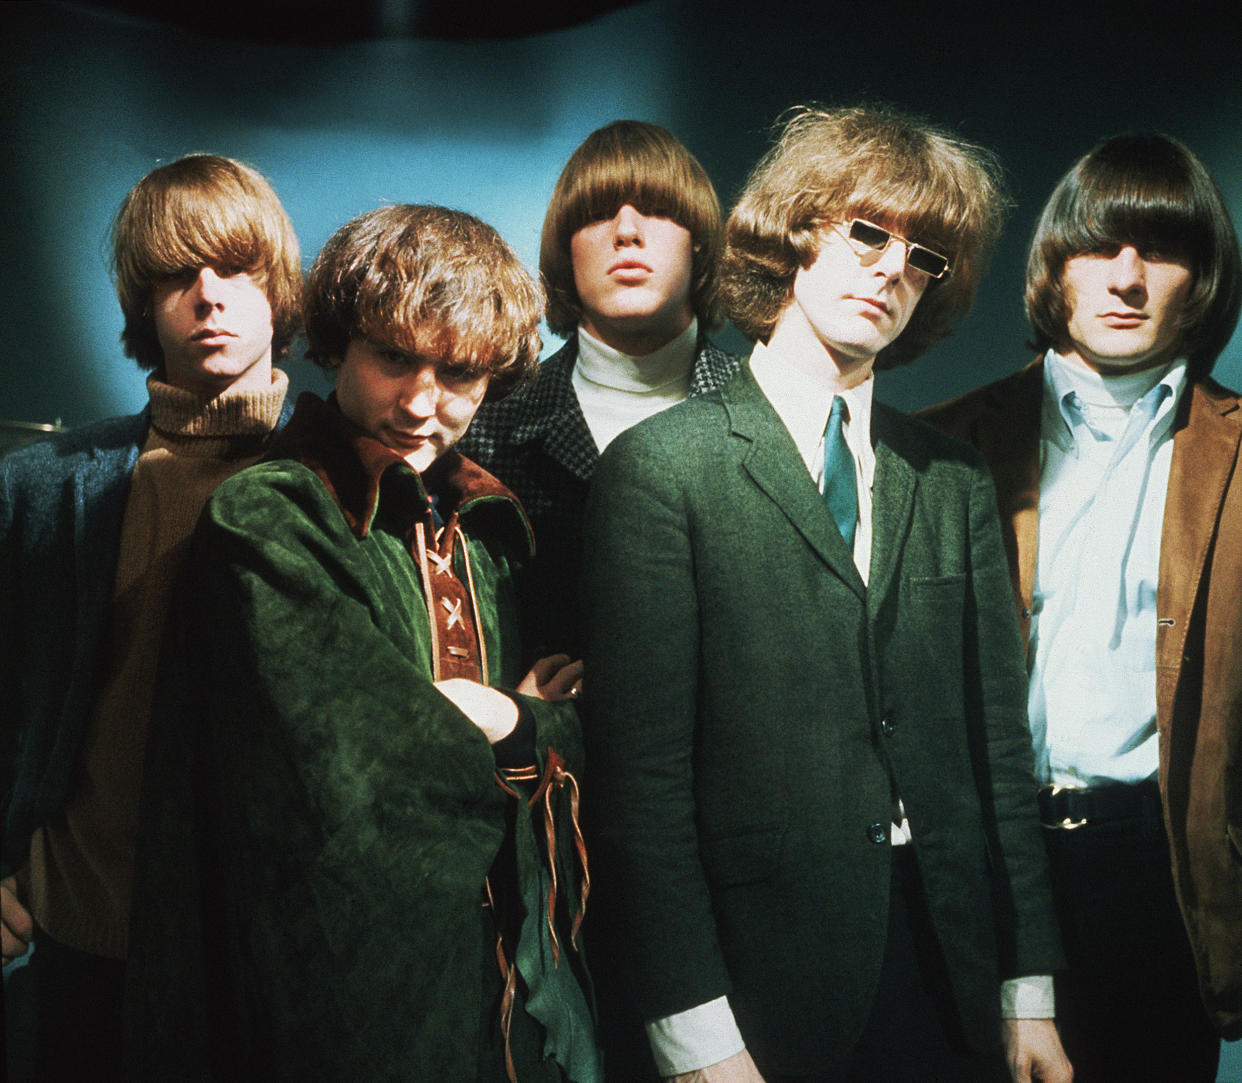 Pop group The Byrds (l to r): Chris Hillman; Dave Crosby; Mike Clark; Jim McGuinn; and Gene Clark. (Photo by © Hulton-Deutsch Collection/CORBIS/Corbis via Getty Images) (Hulton-Deutsch Collection / Corbis via Getty Images file)